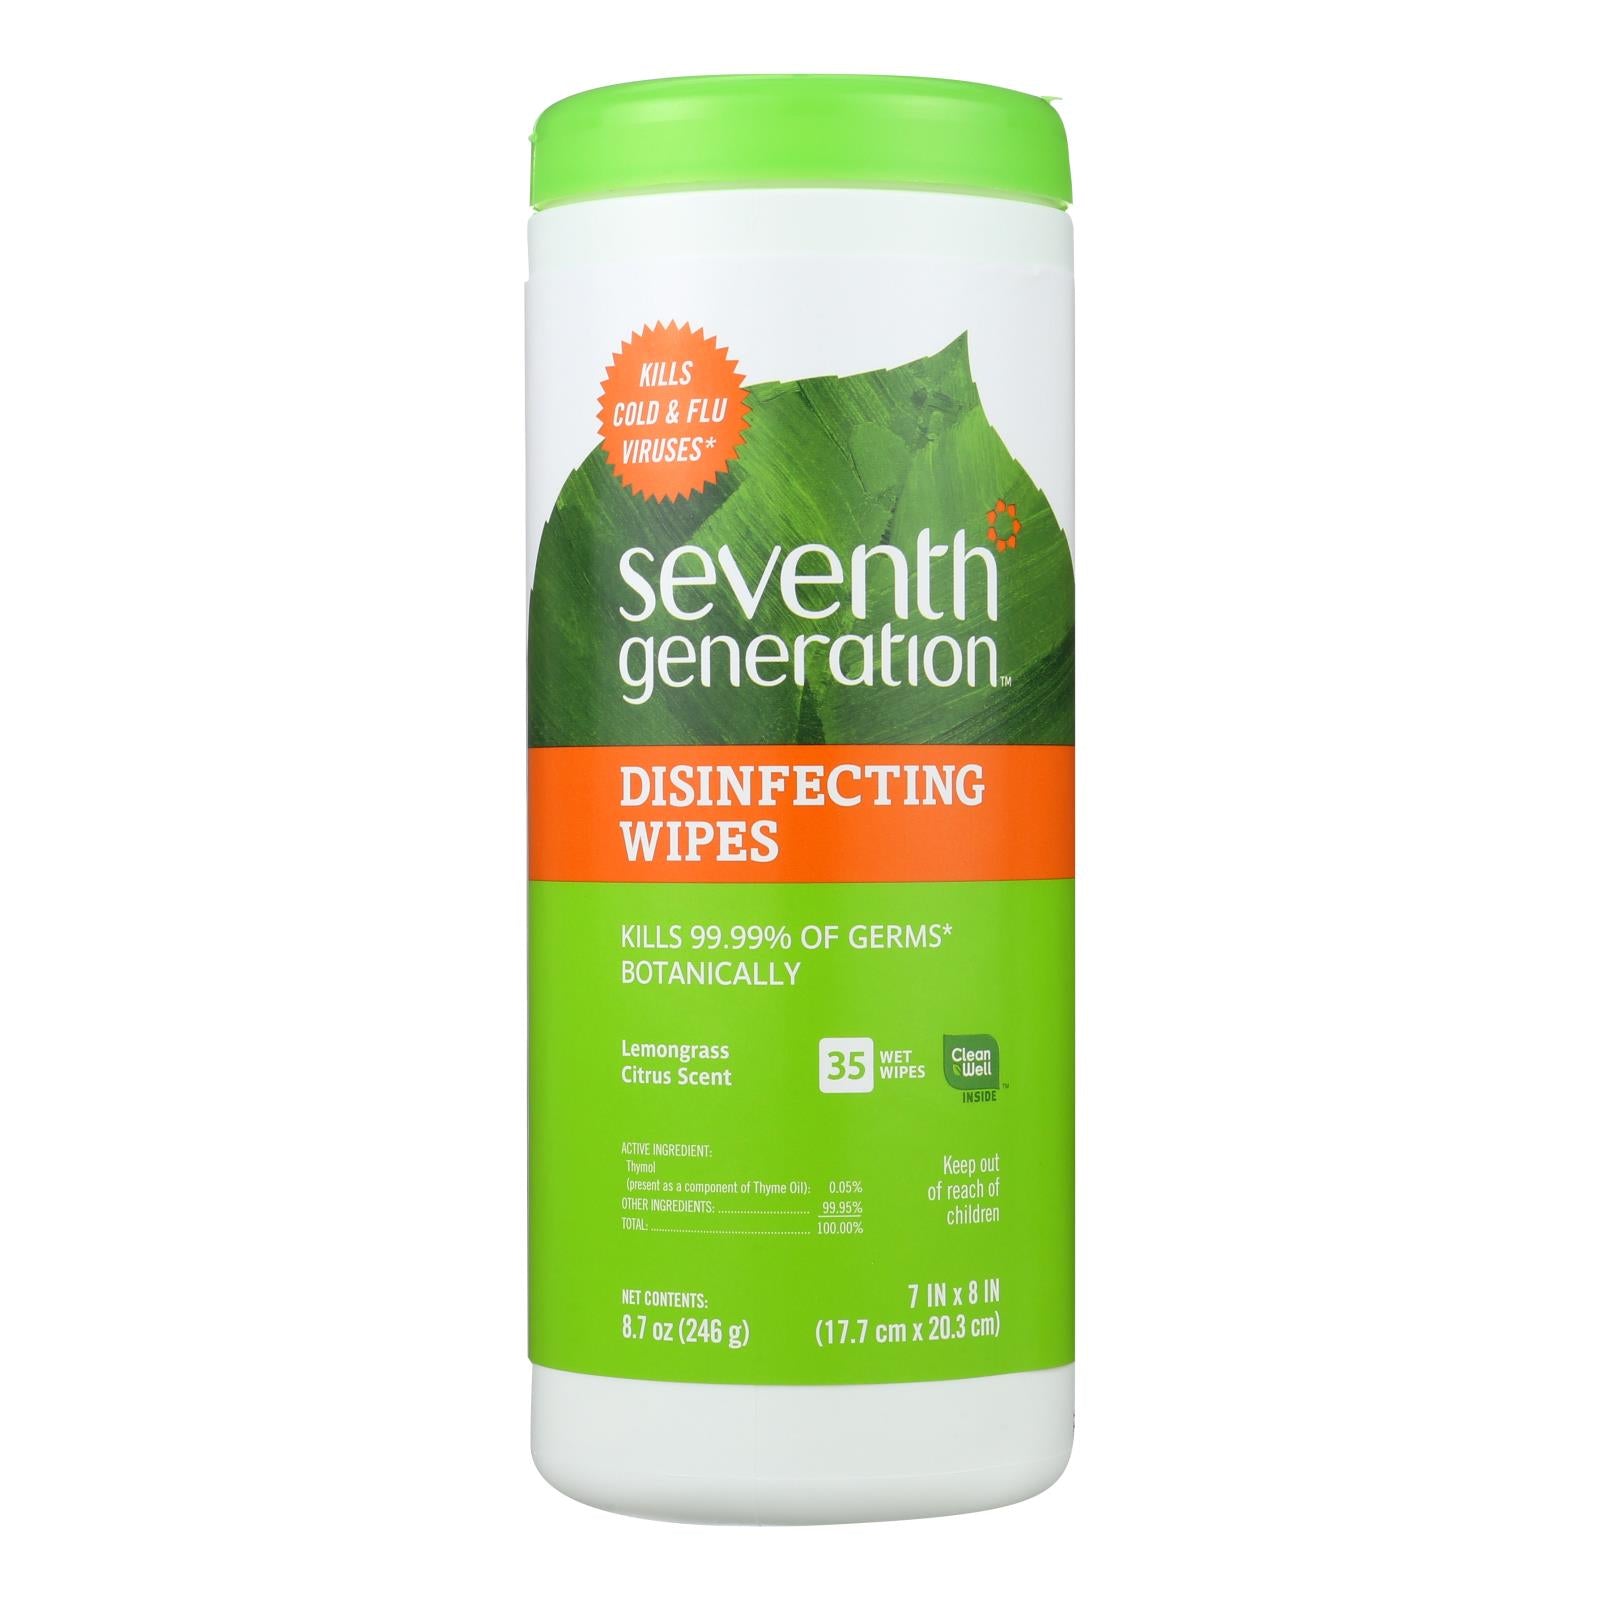 Seventh Generation Disinfecting Wipes - Multi Surface Lemongrass Citrus - 35 Ct - Case Of 12